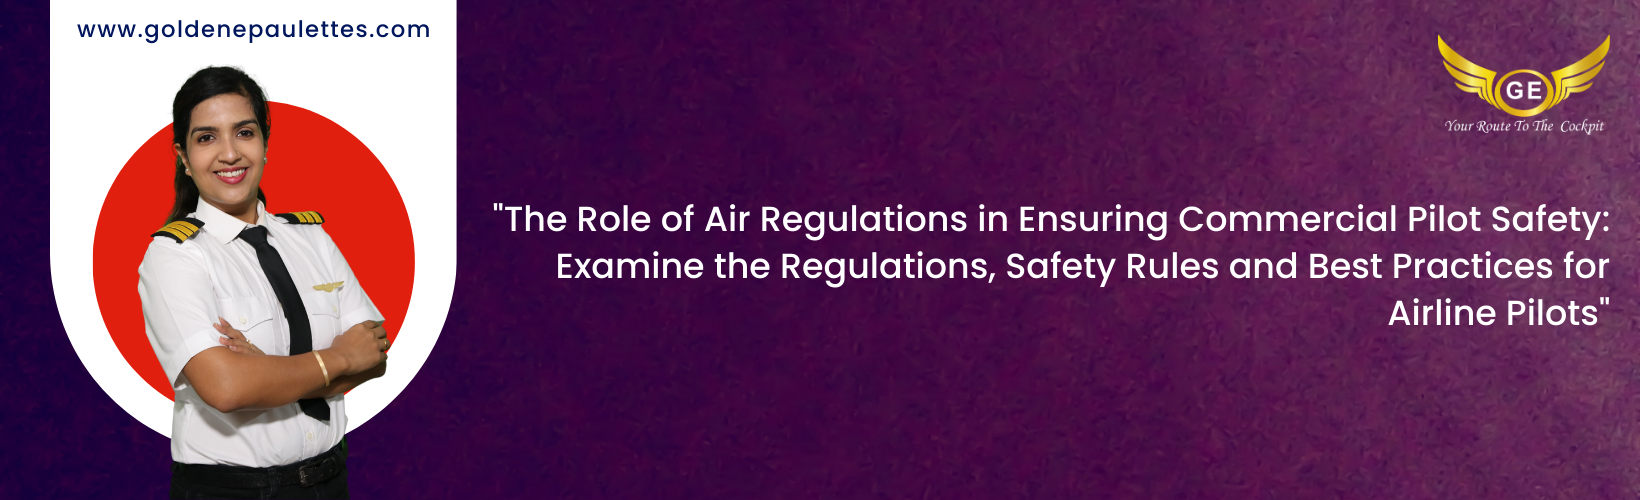 Resources for Commercial Pilots Taking the Air Regulations Course